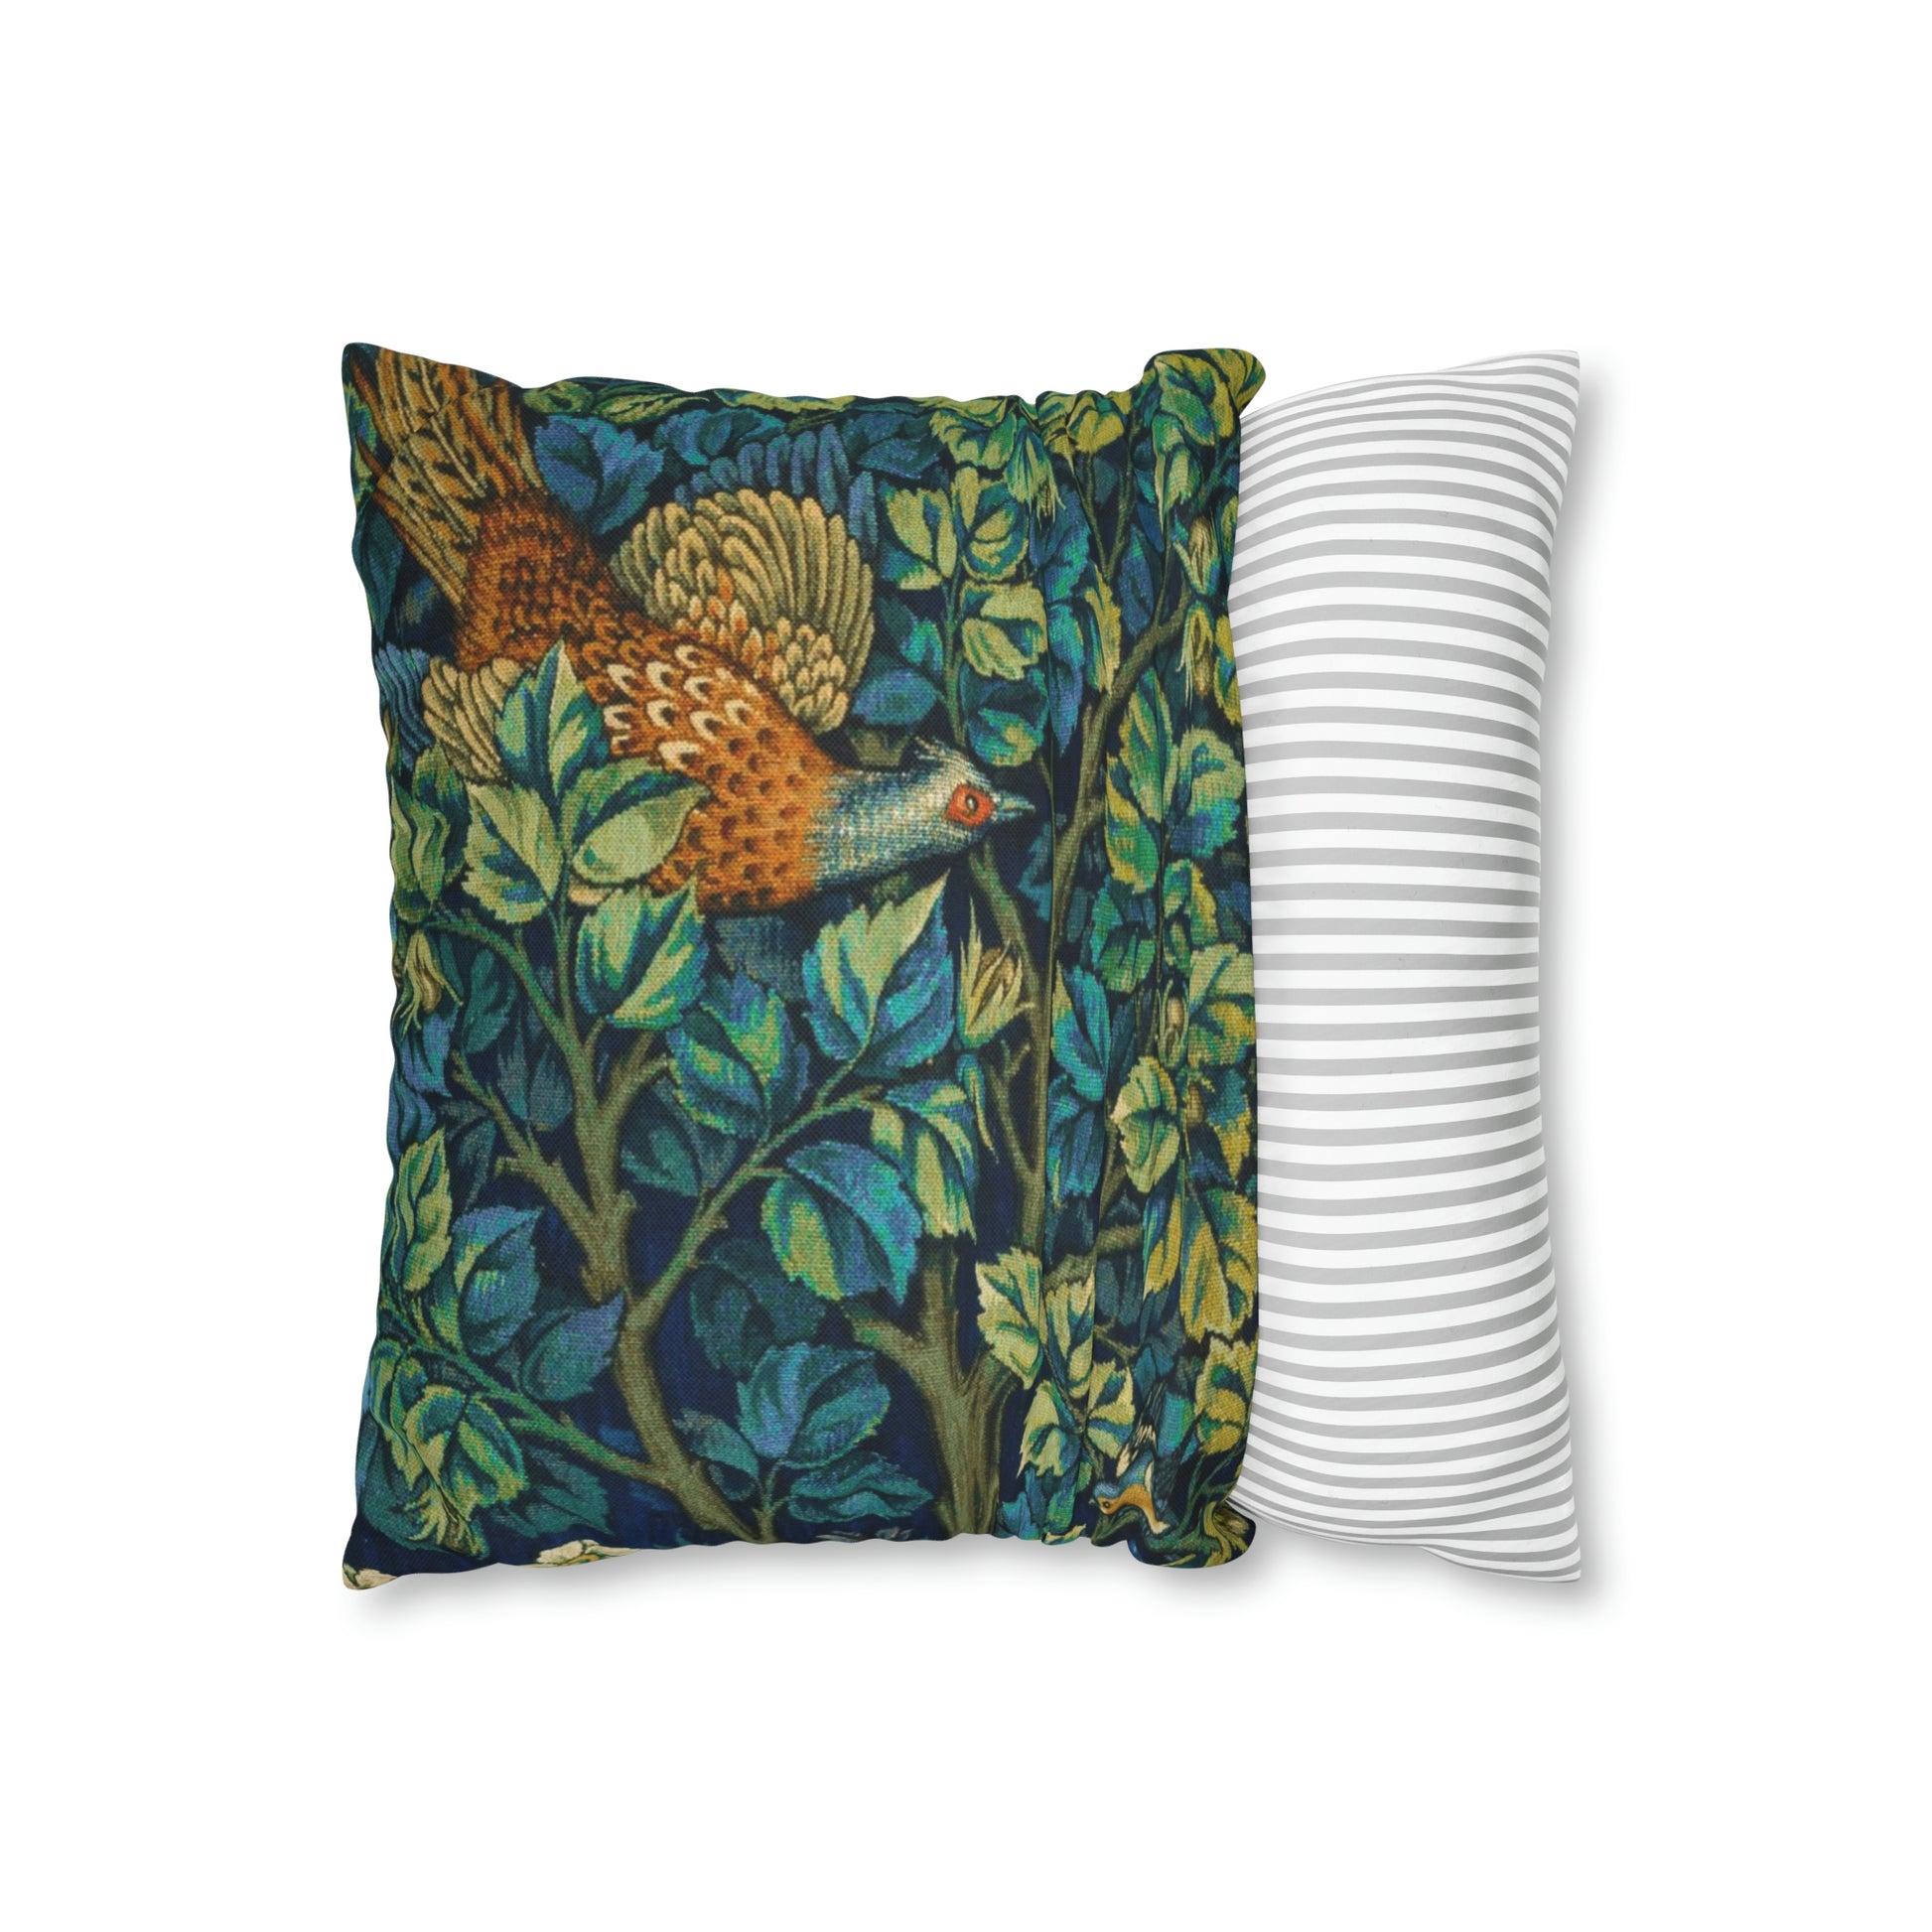 william-morris-co-cushion-cover-pheasant-and-squirrel-collection-pheasant-blue-11